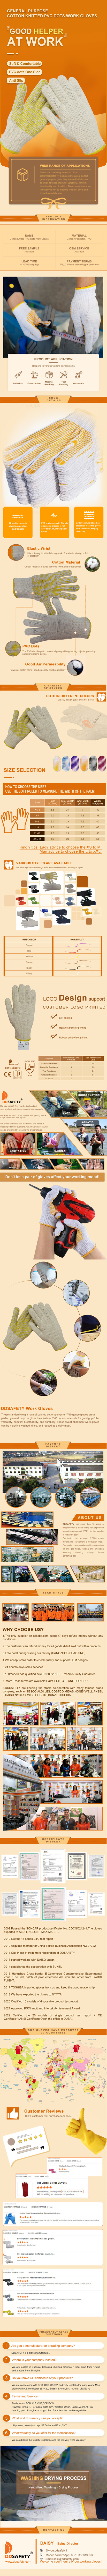 White Cotton Polyester PVC Dotted String Knit Work Gloves Yellow pvc dots one side - DKP105 White Cotton Polyester PVC Dotted String Knit Work Gloves Yellow pvc dots one side - DKP105 gloves,work gloves,cotton work gloves,pvc dotted gloves,PVC Dotted Knit Gloves